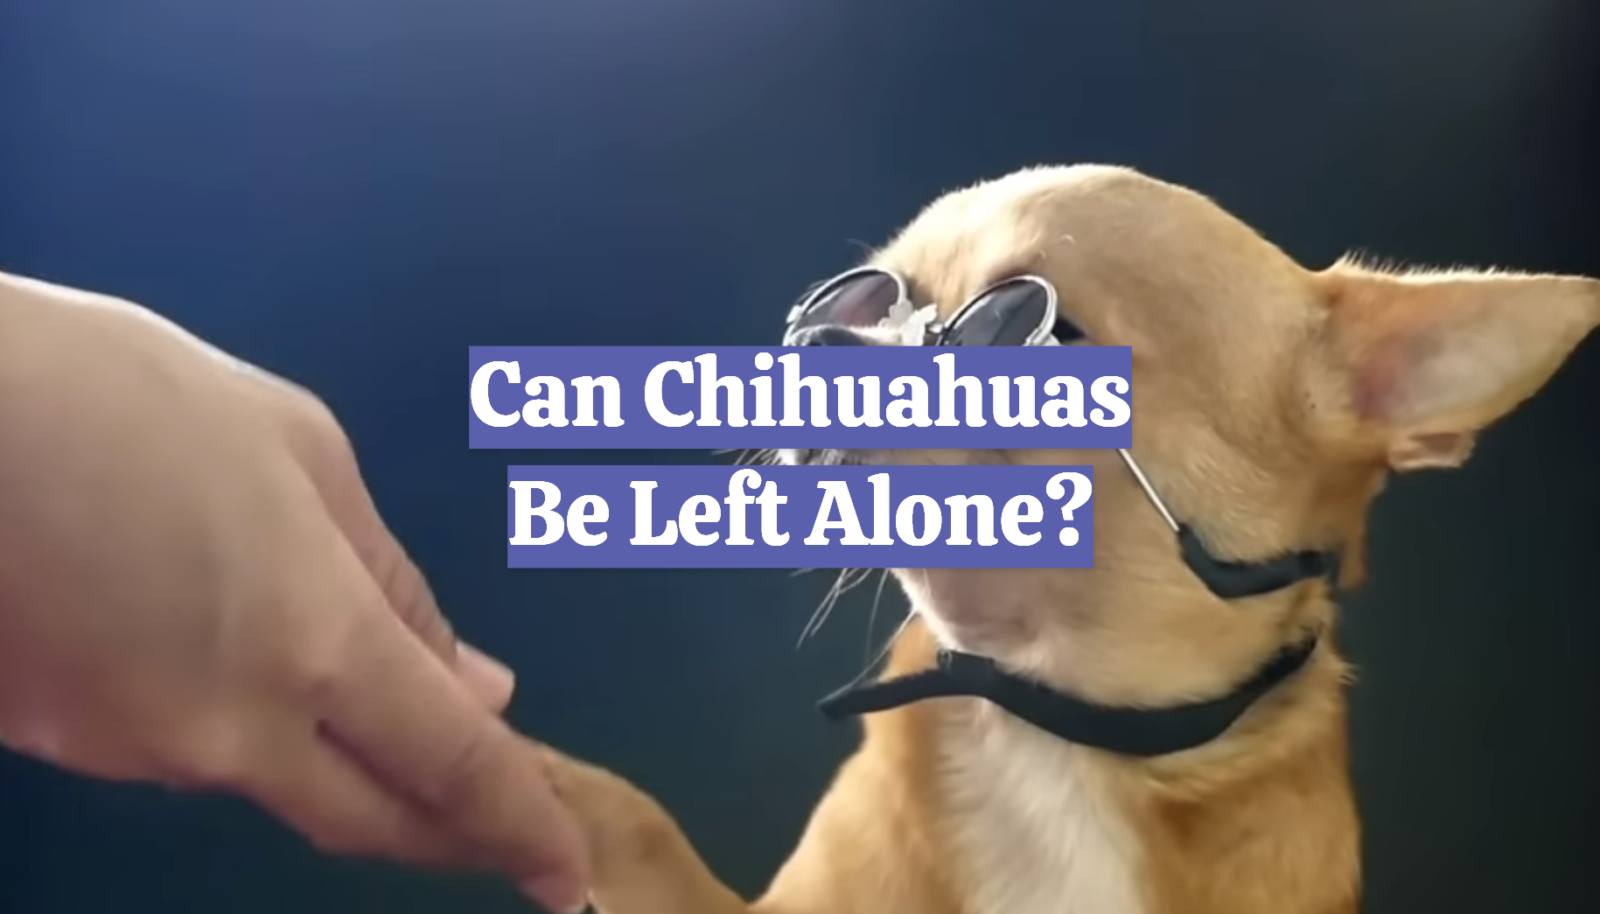 Can Chihuahuas Be Left Alone?